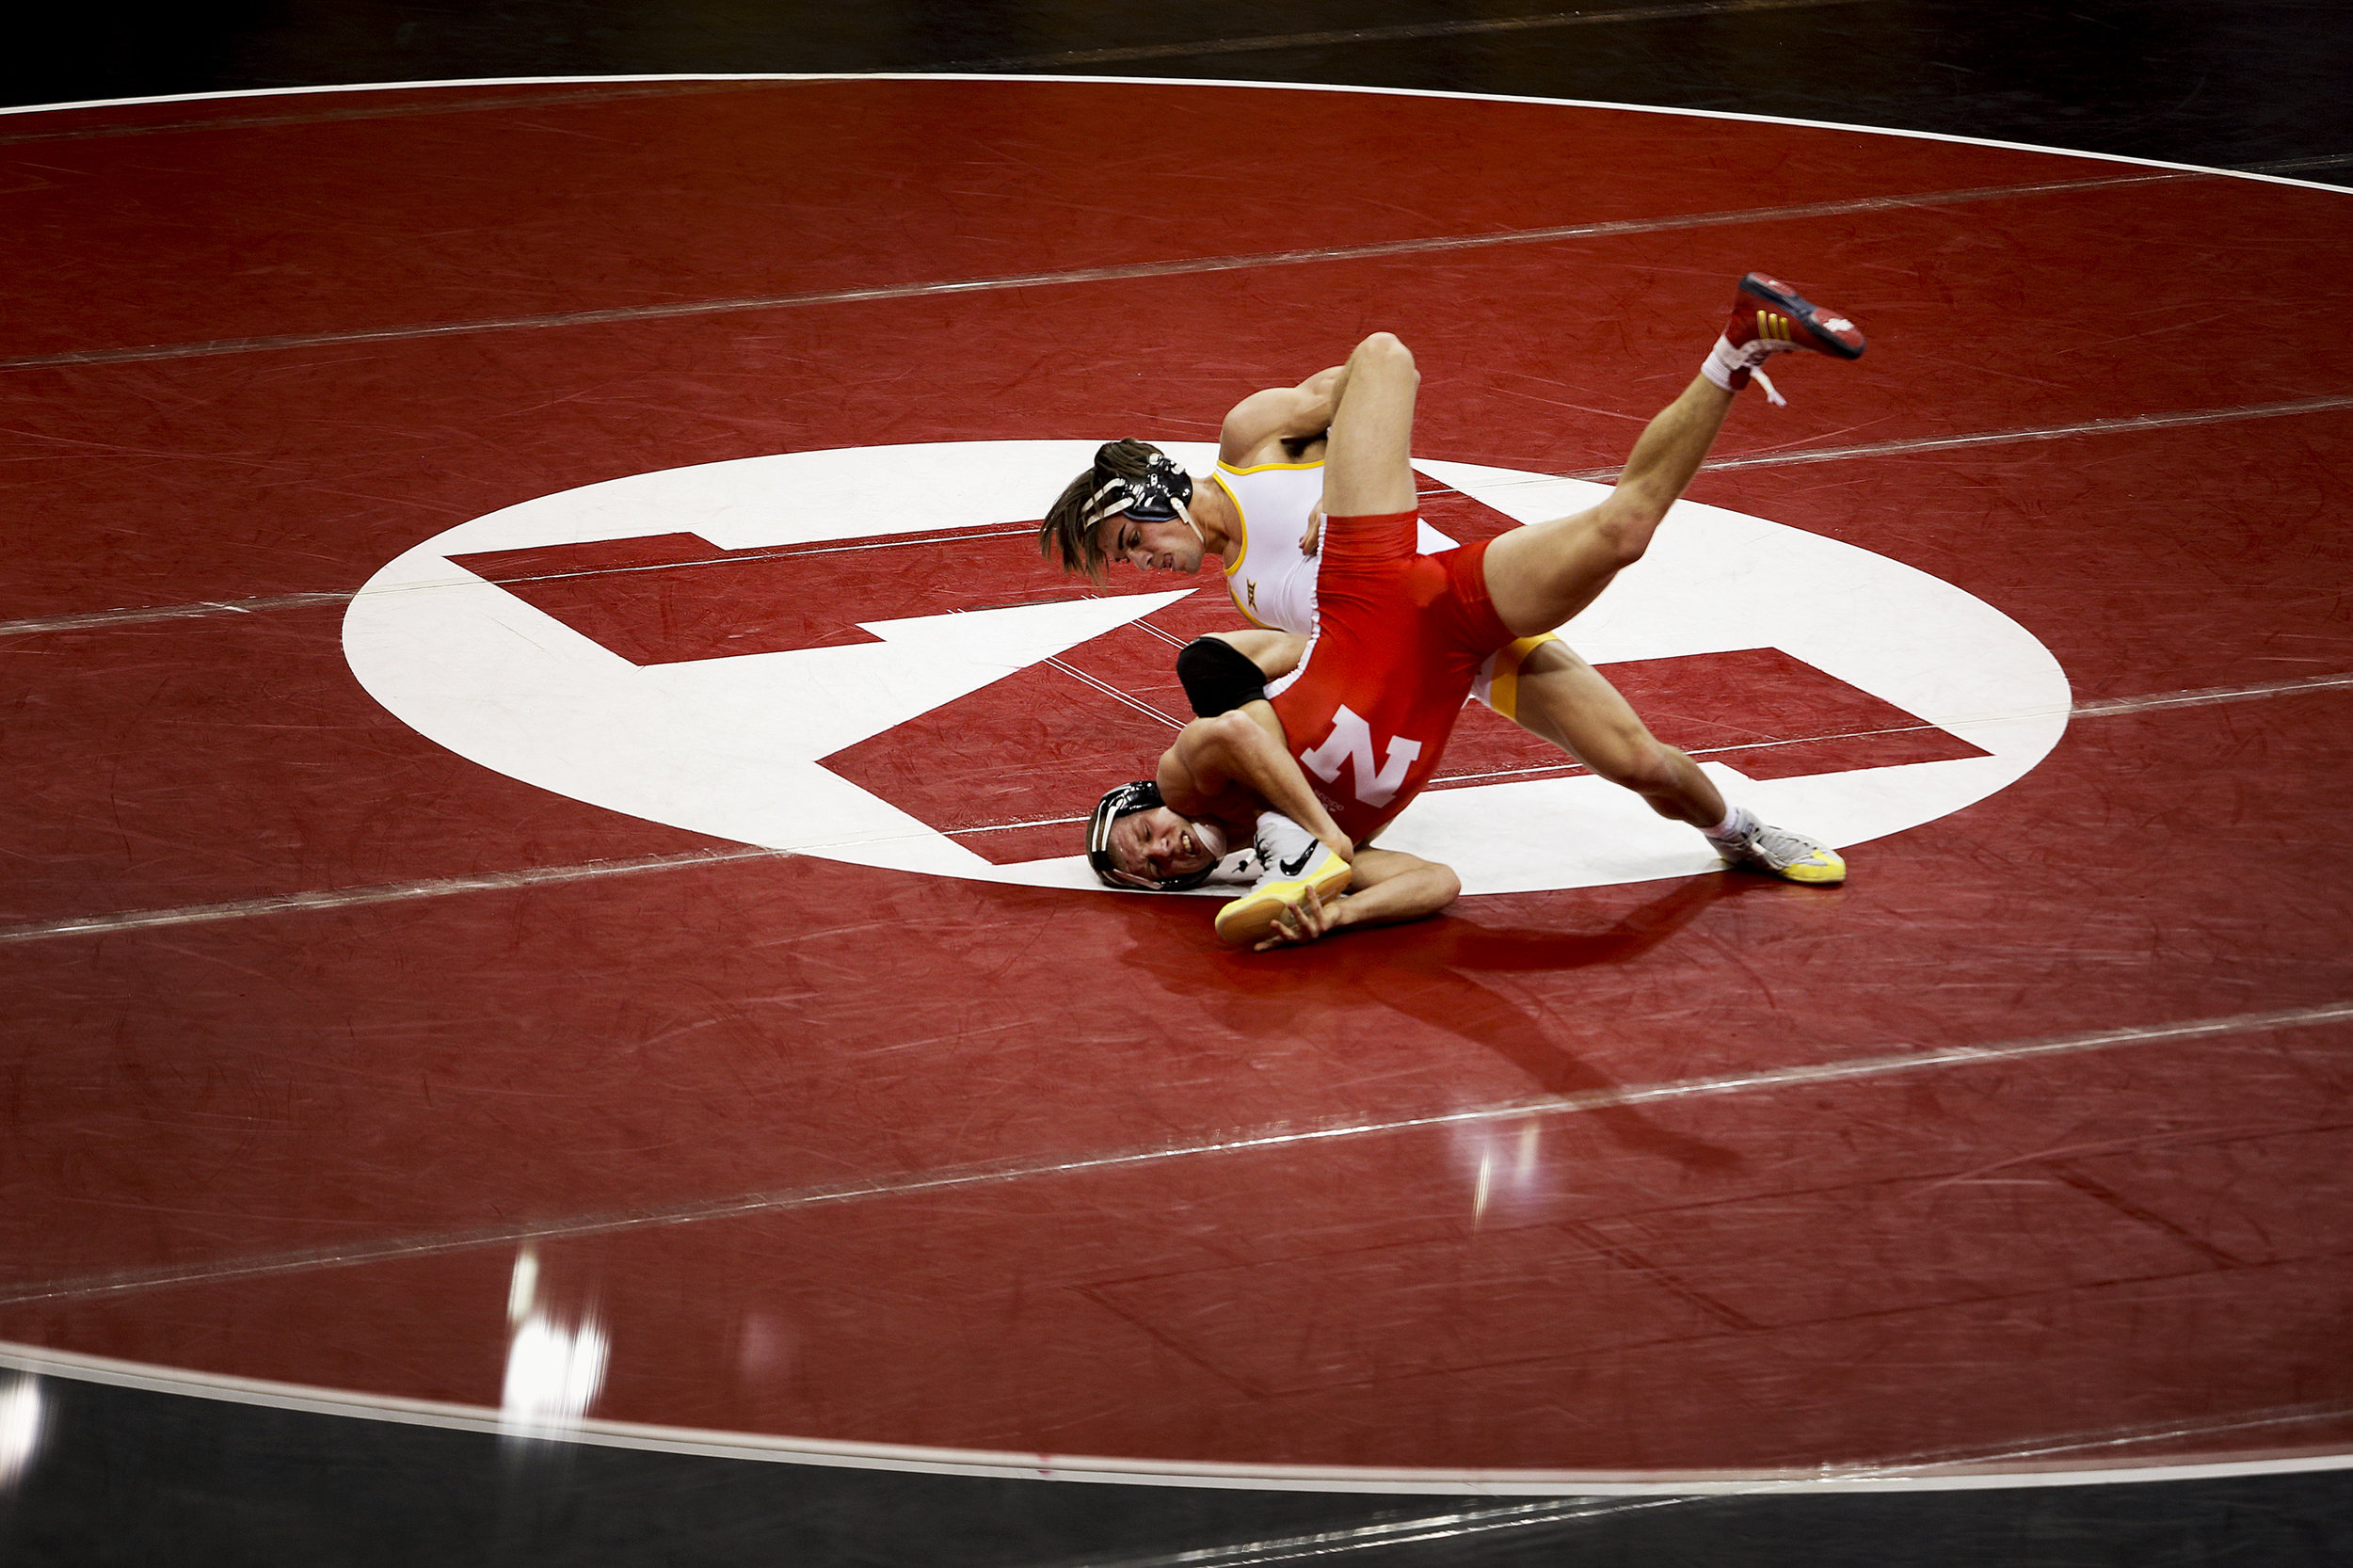  Nebraska's Anthony Abidin (red) is forced to the mat by Wyoming's Bryce Meredith (white) during their match at Devaney Sports Complex Saturday November 21, 2015 in Lincoln, Nebraska. Meredith would defeat Abidin 12-3 but represented the only Wyoming